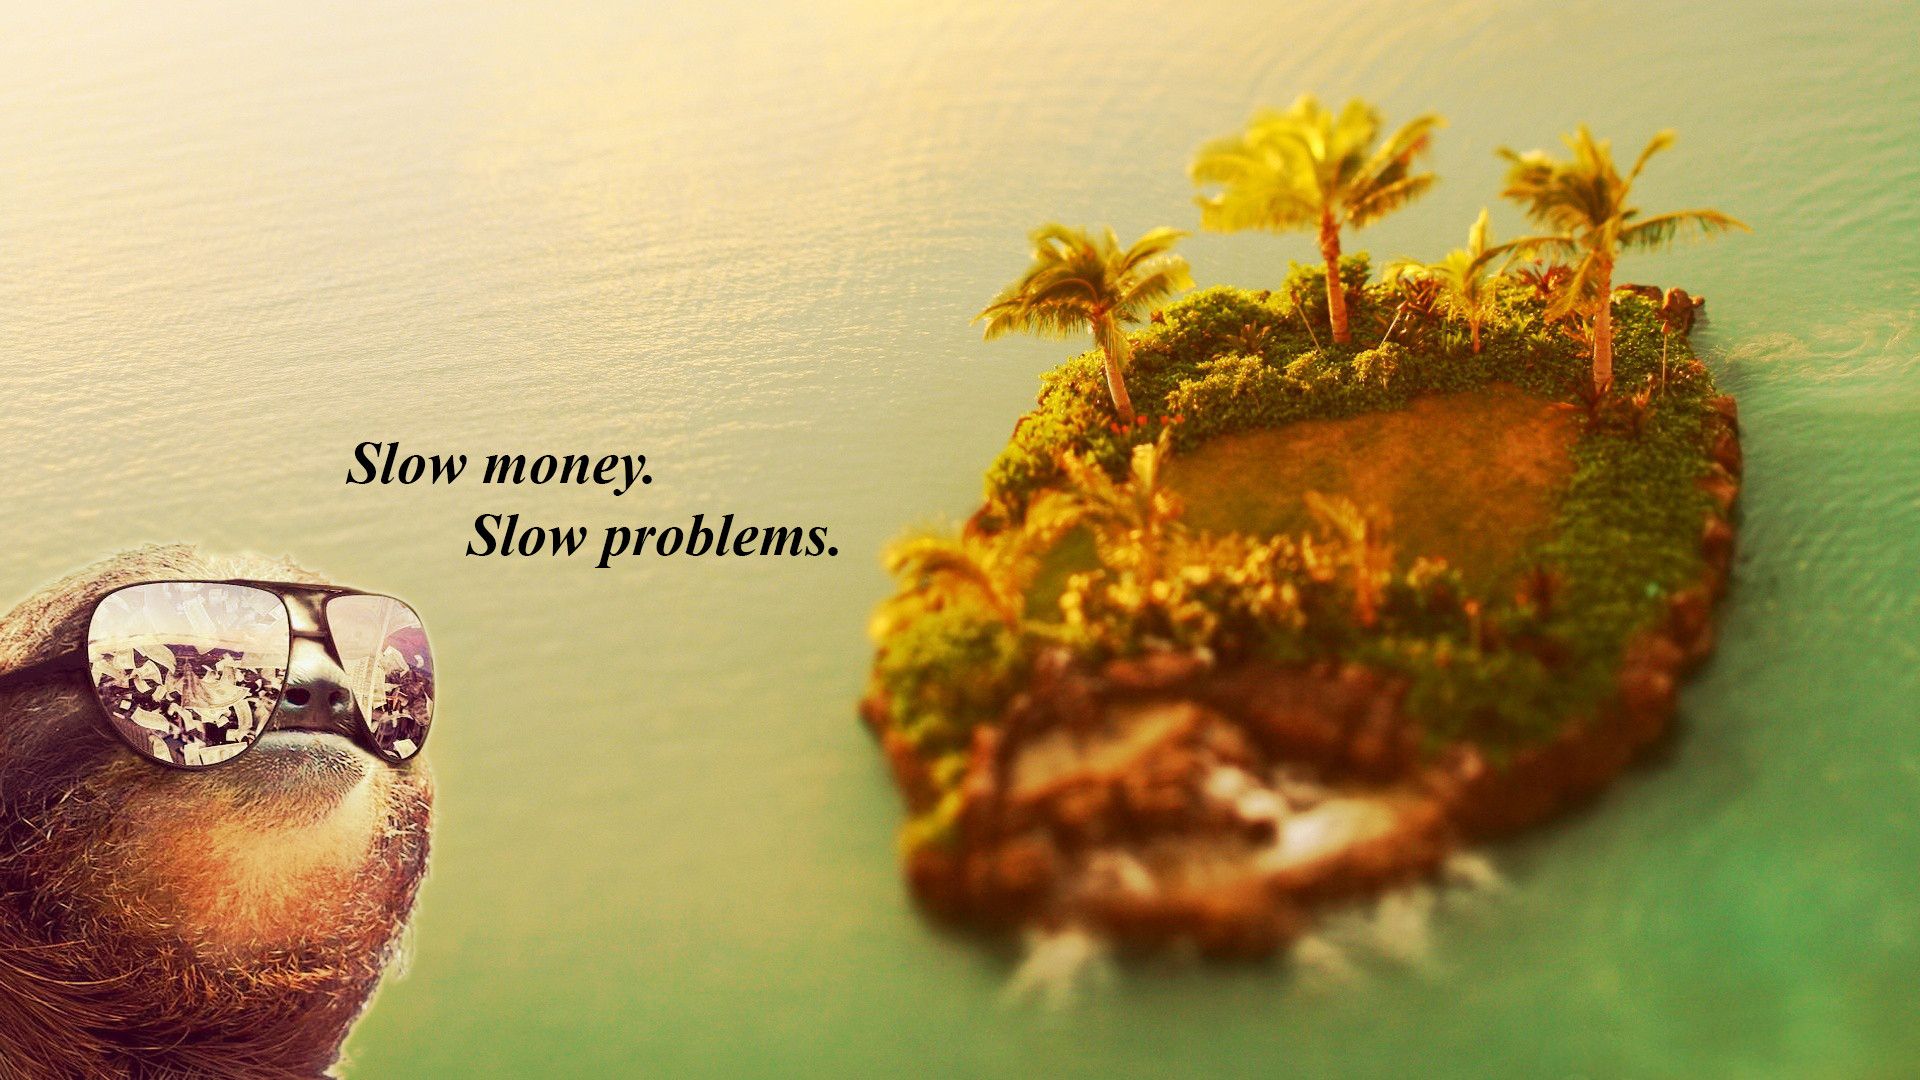 Slow money. Slow problems. - a quote on a photo of a small island with palm trees - Sloth